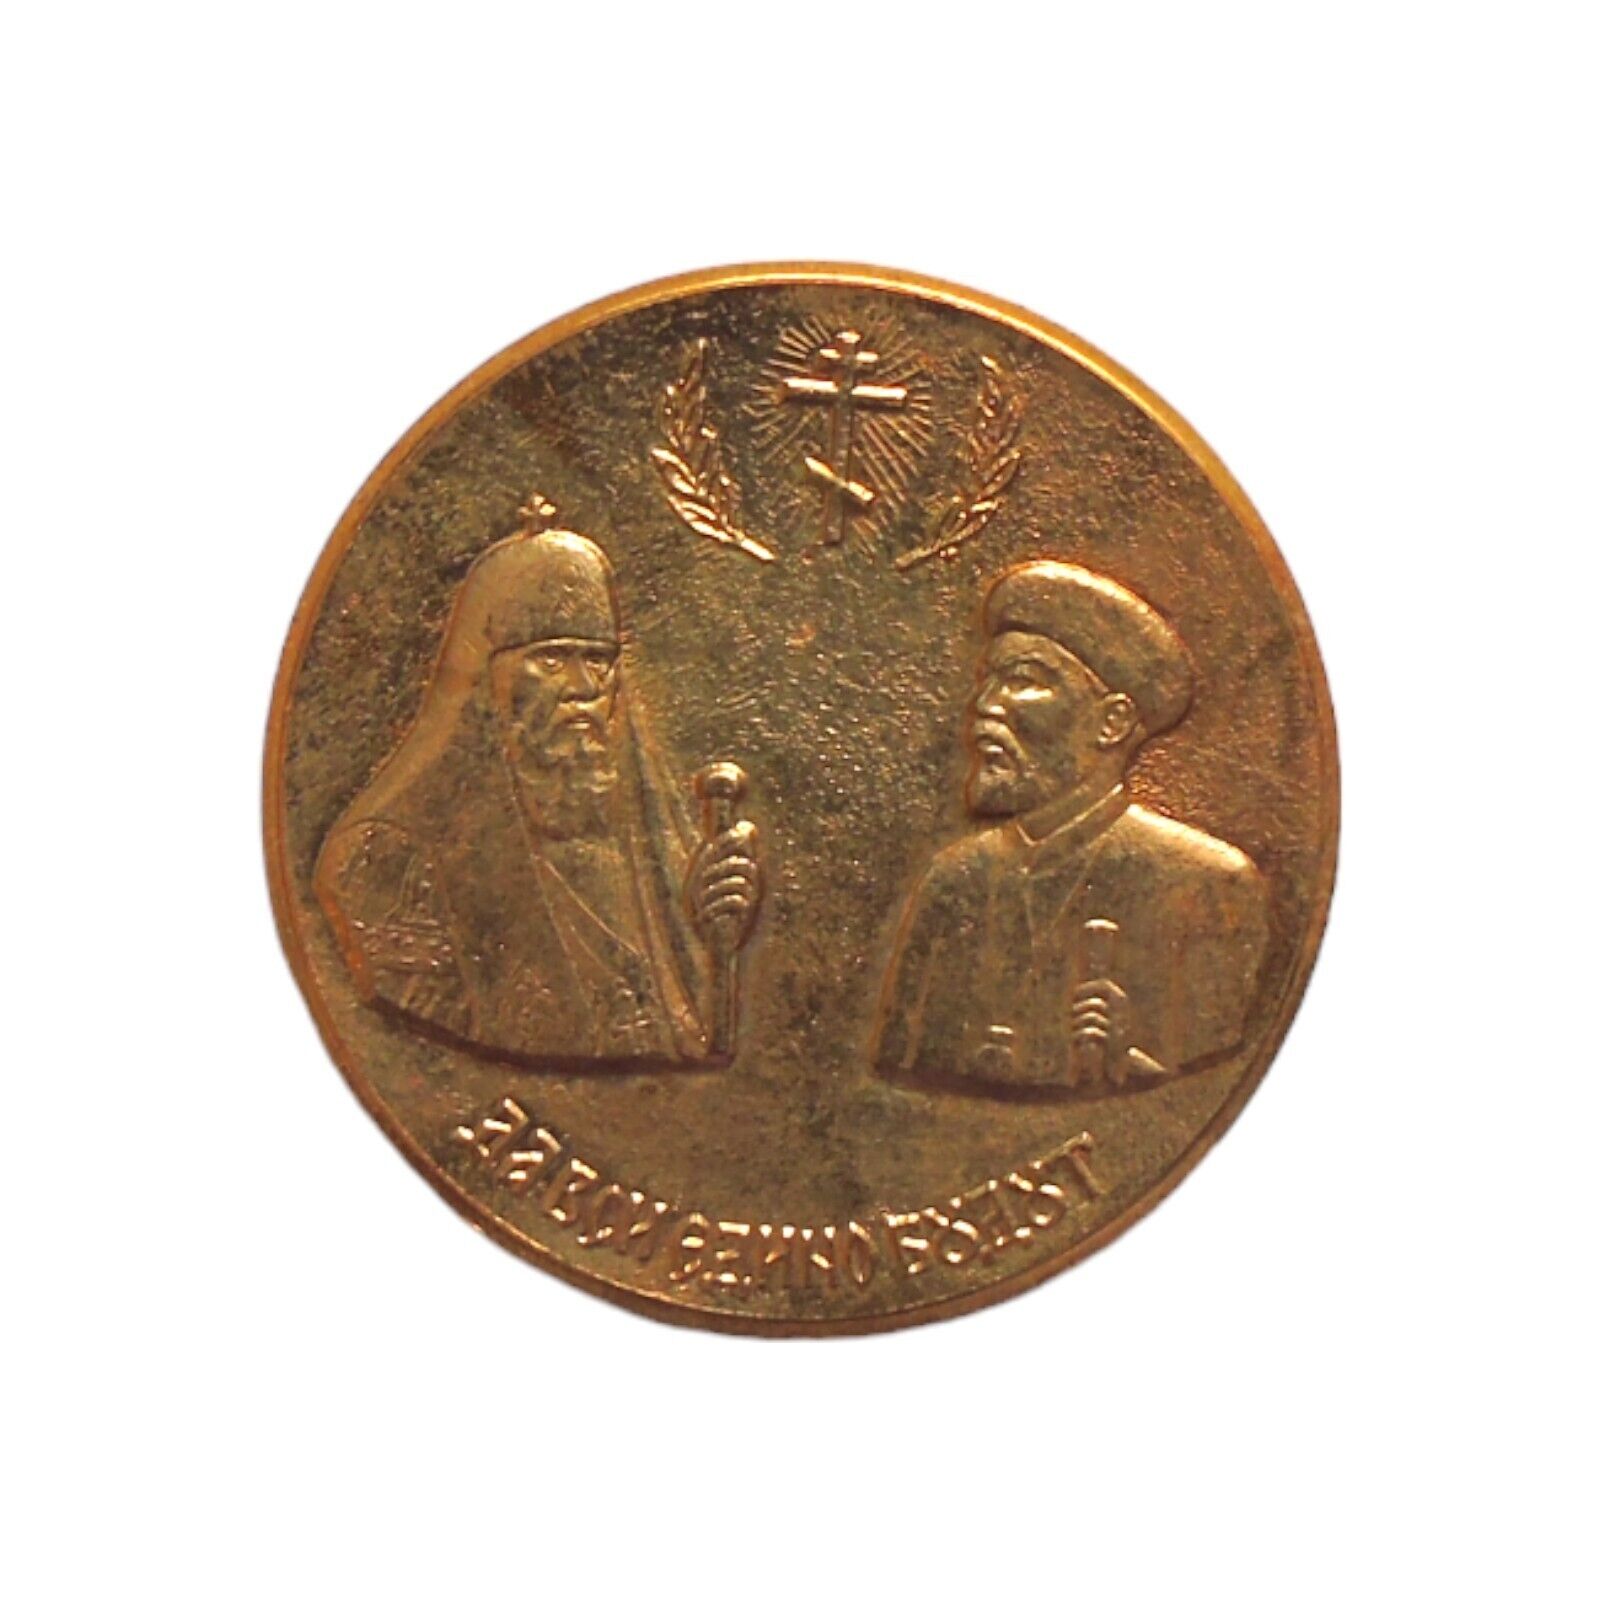 Vintage Ethiopian and Russian Orthodox Christian Bronze Medal/ Token 1974